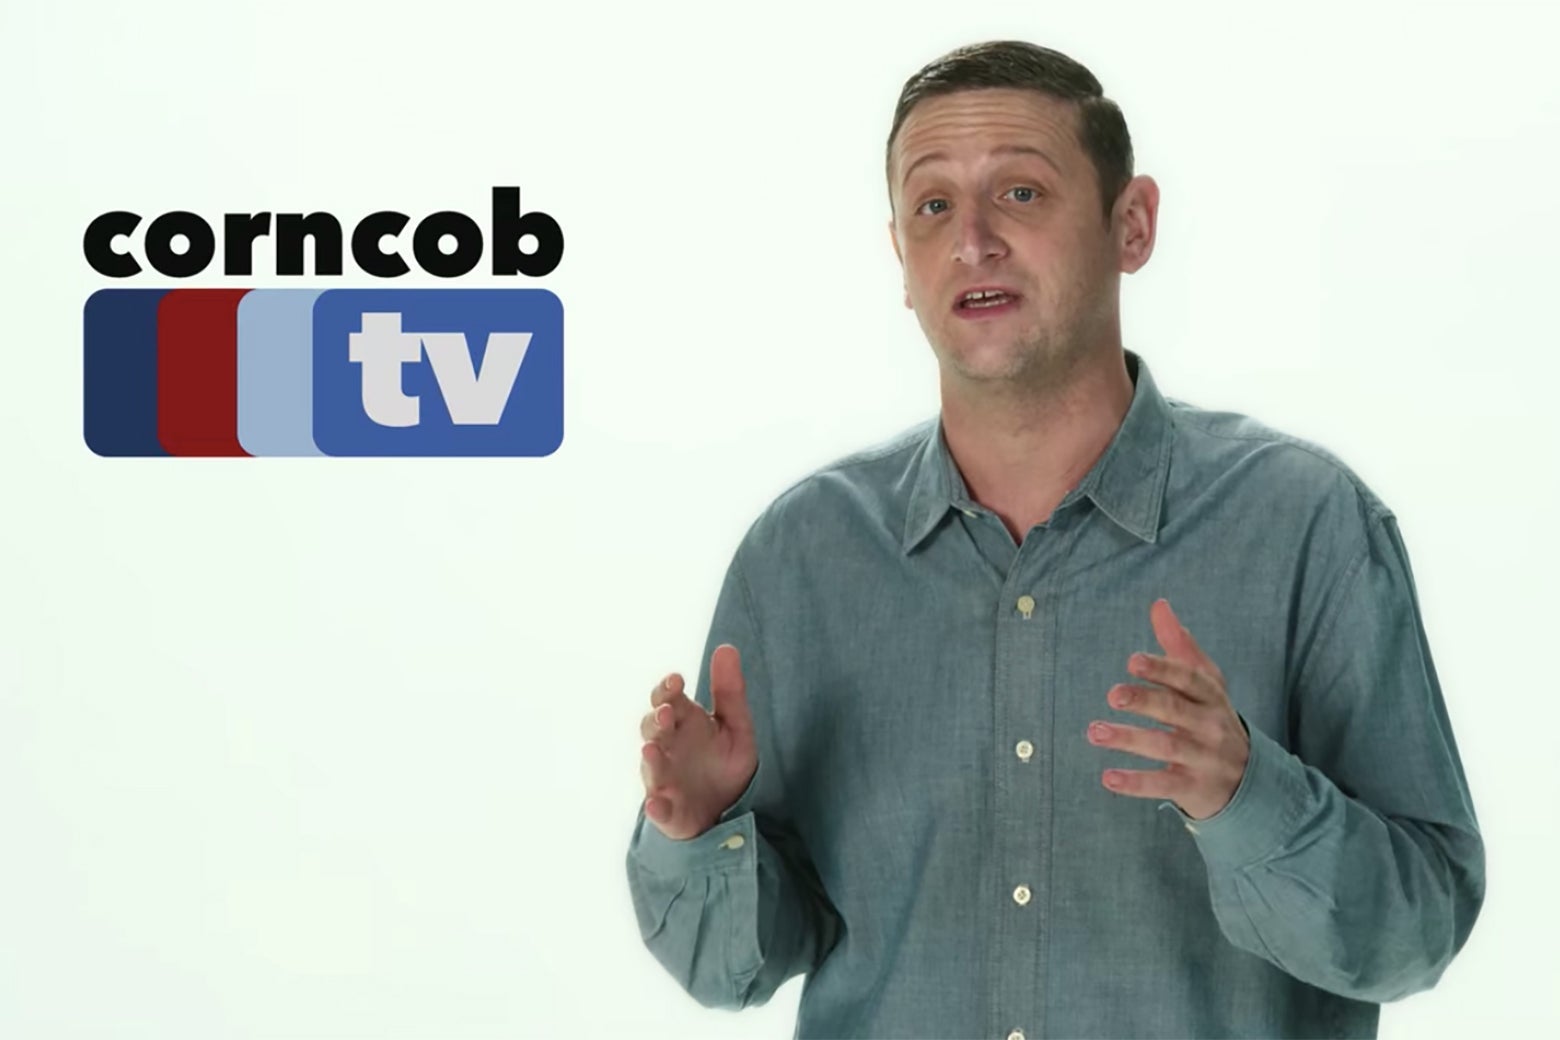 A man against a white background with a logo for Corncob TV.